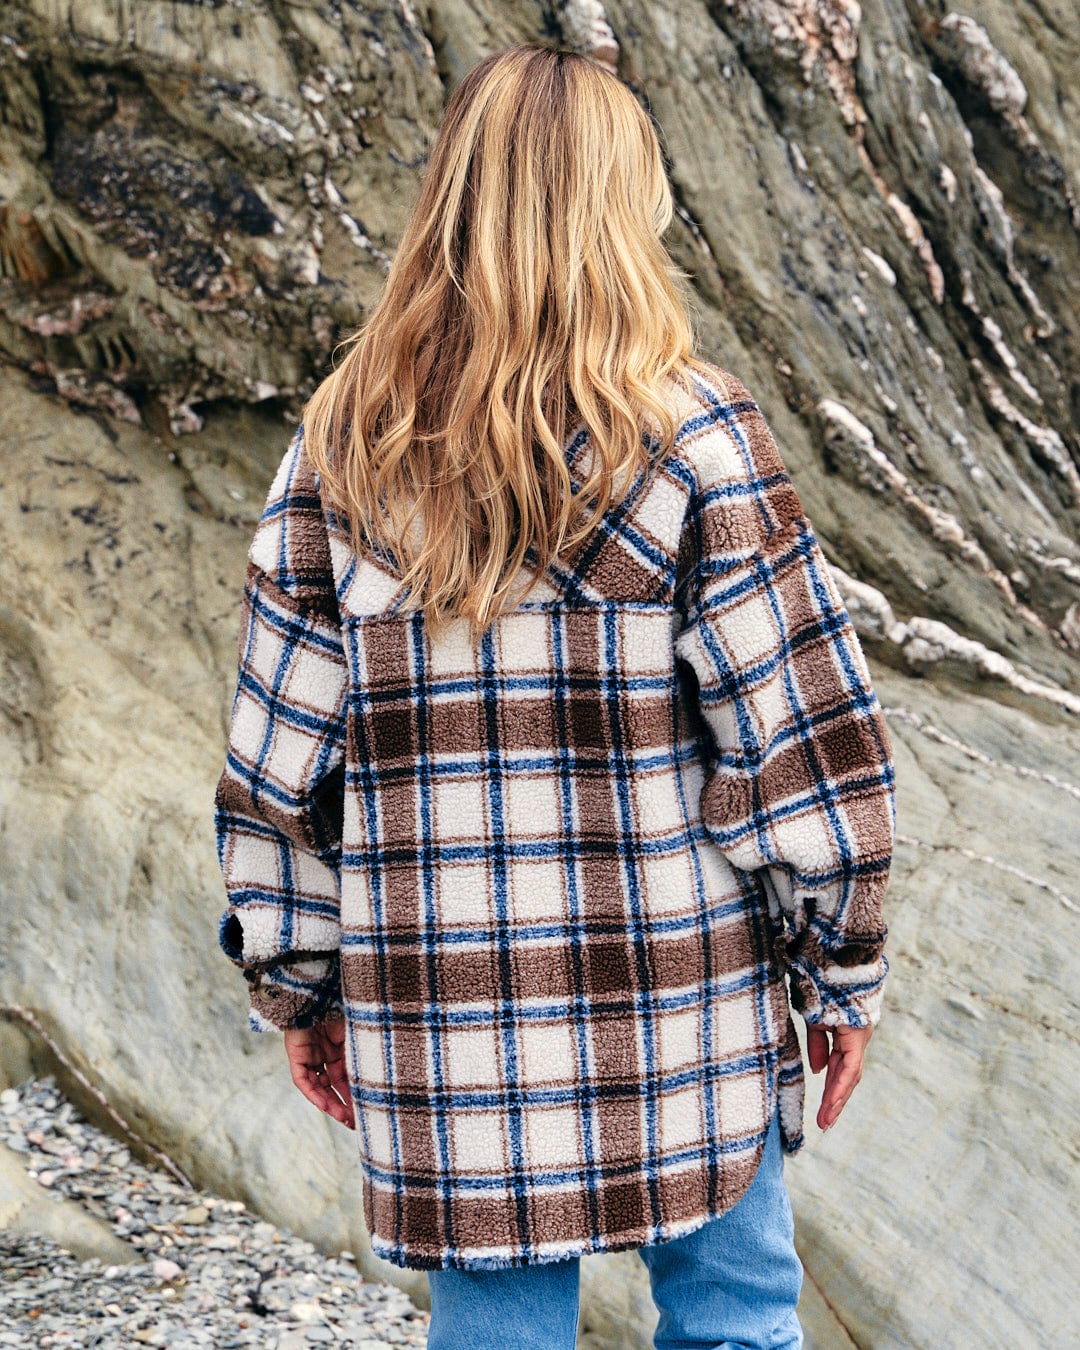 A woman wearing jeans and a Saltrock Laurie - Womens Check Sherpa Fleece Coat - Cream standing on a rocky beach in cold weather.